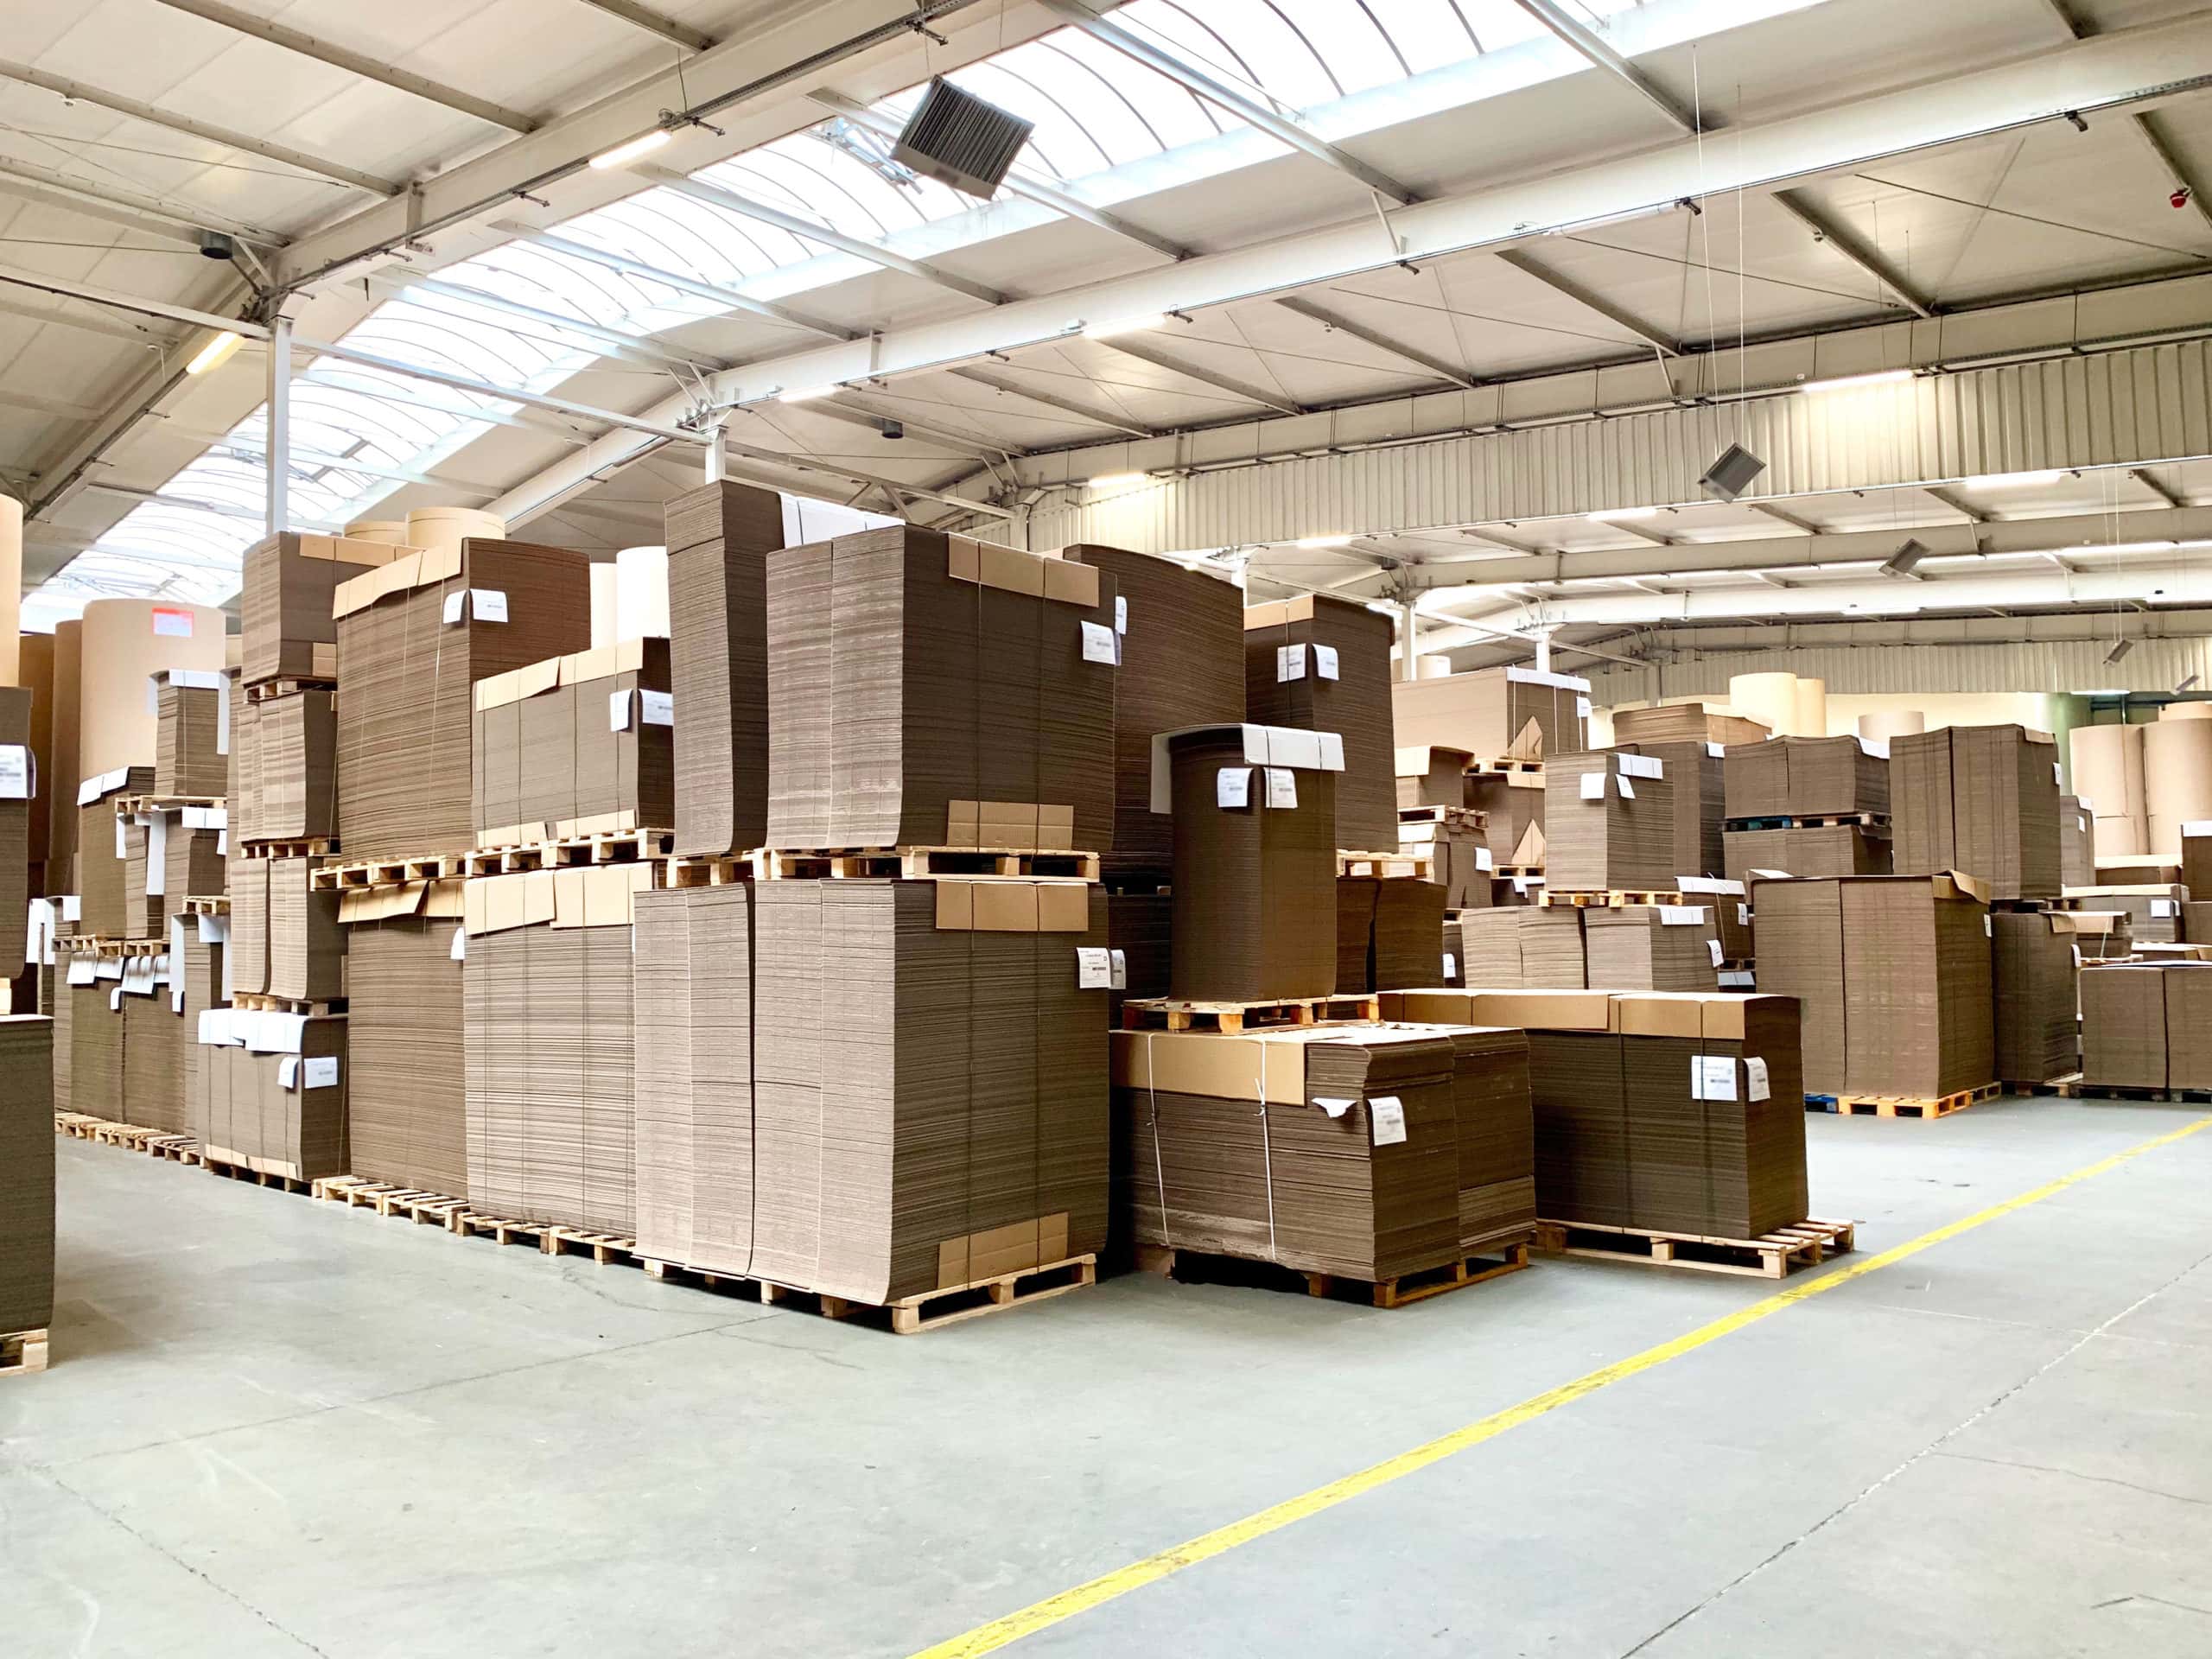 Corrugated cardboard pallets in the generic warehouse